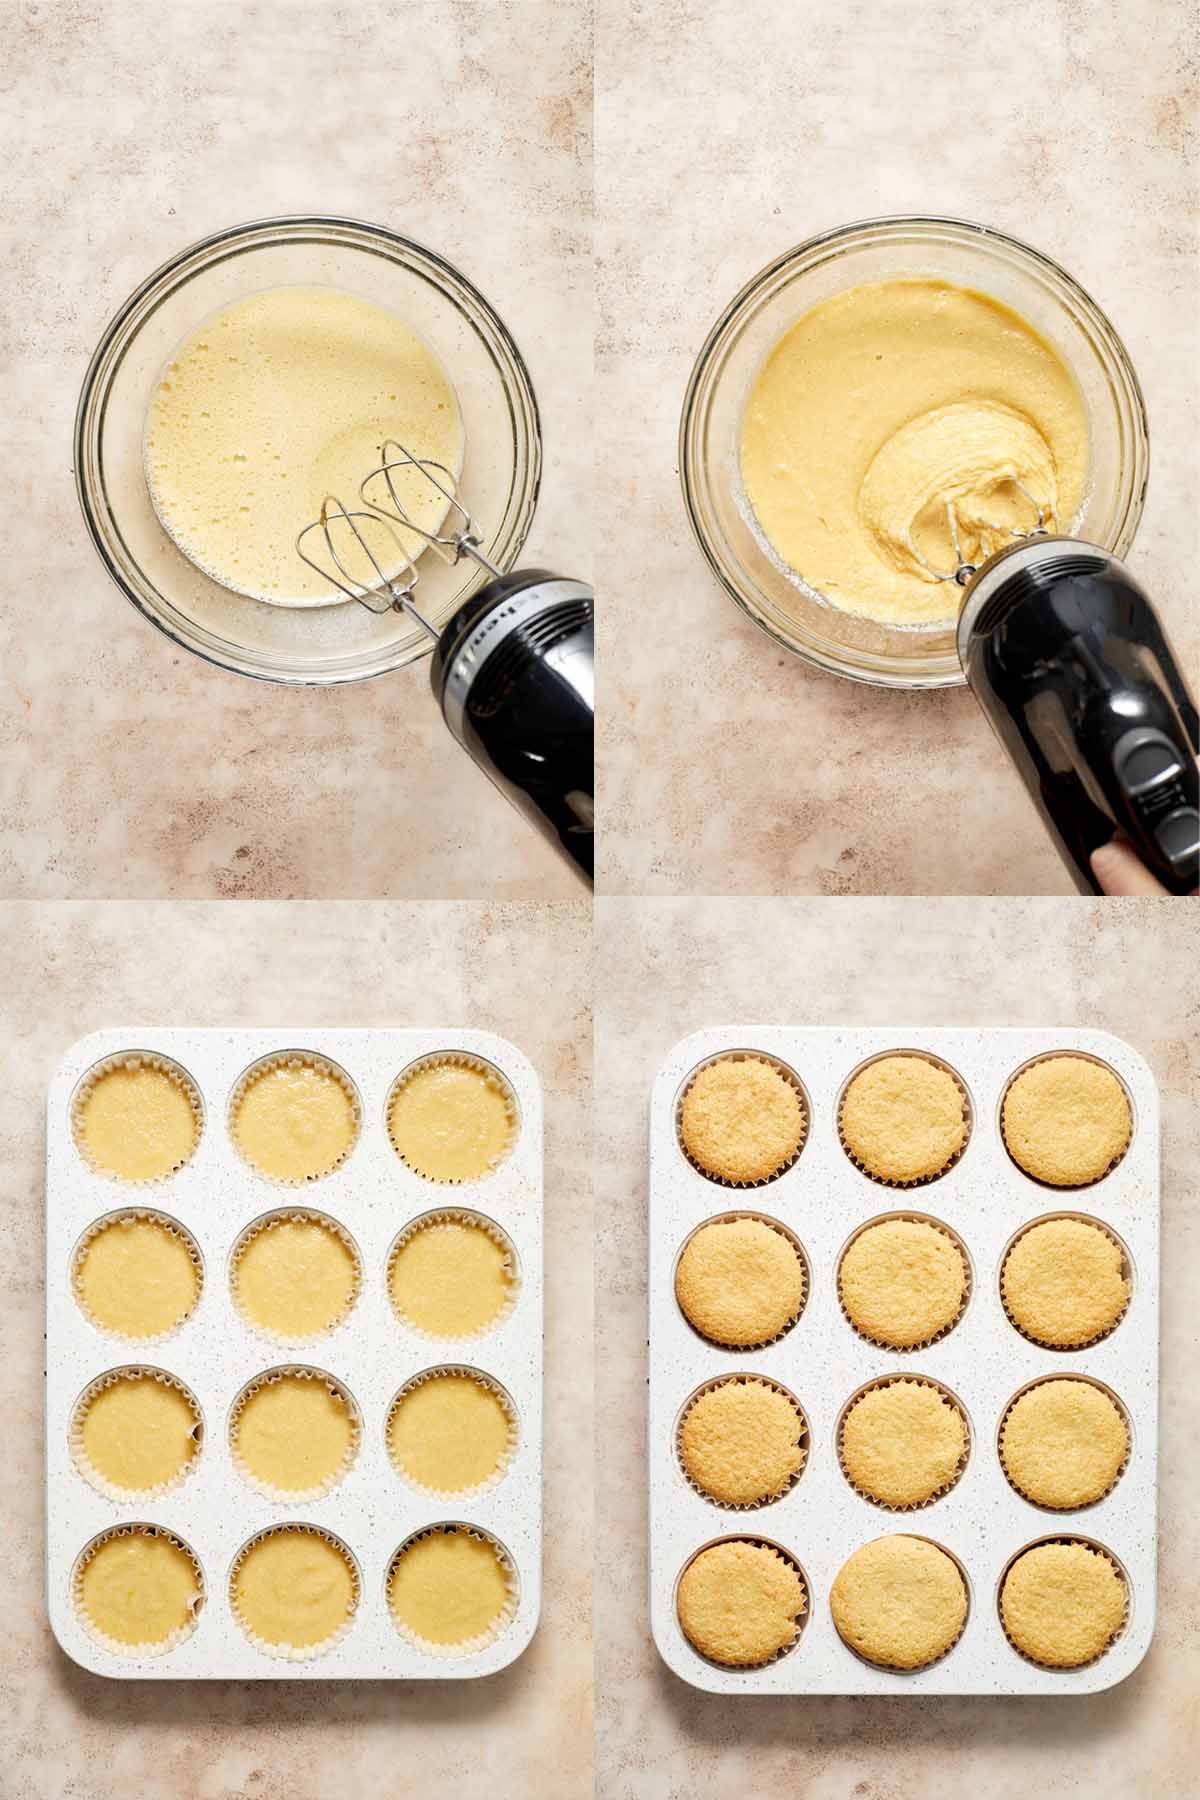 Collage of 4 photos showing how the eggs and sugar are beaten together, the mixed batter, the batter in the muffin pan and the baked cupcakes in the muffin pan.